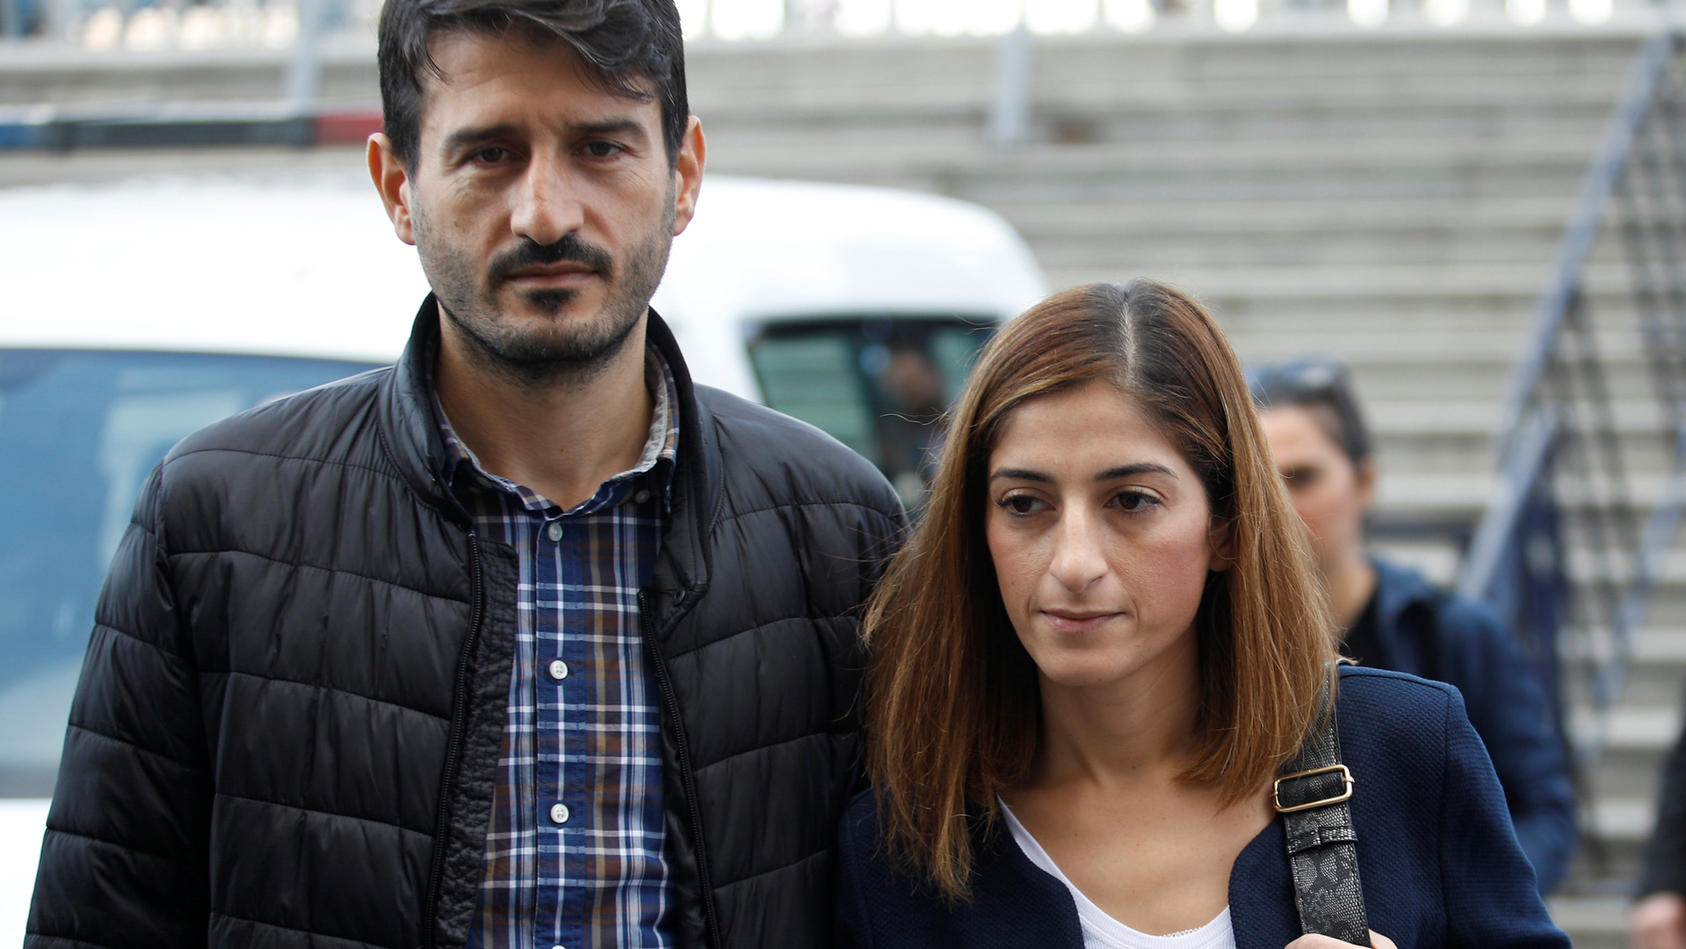 German journalist Mesale Tolu, accompanied by her husband Murat Tolu, arrives at the Justice Palace, the Caglayan courthouse, in Istanbul, Turkey October 16, 2018. REUTERS/Kemal Aslan